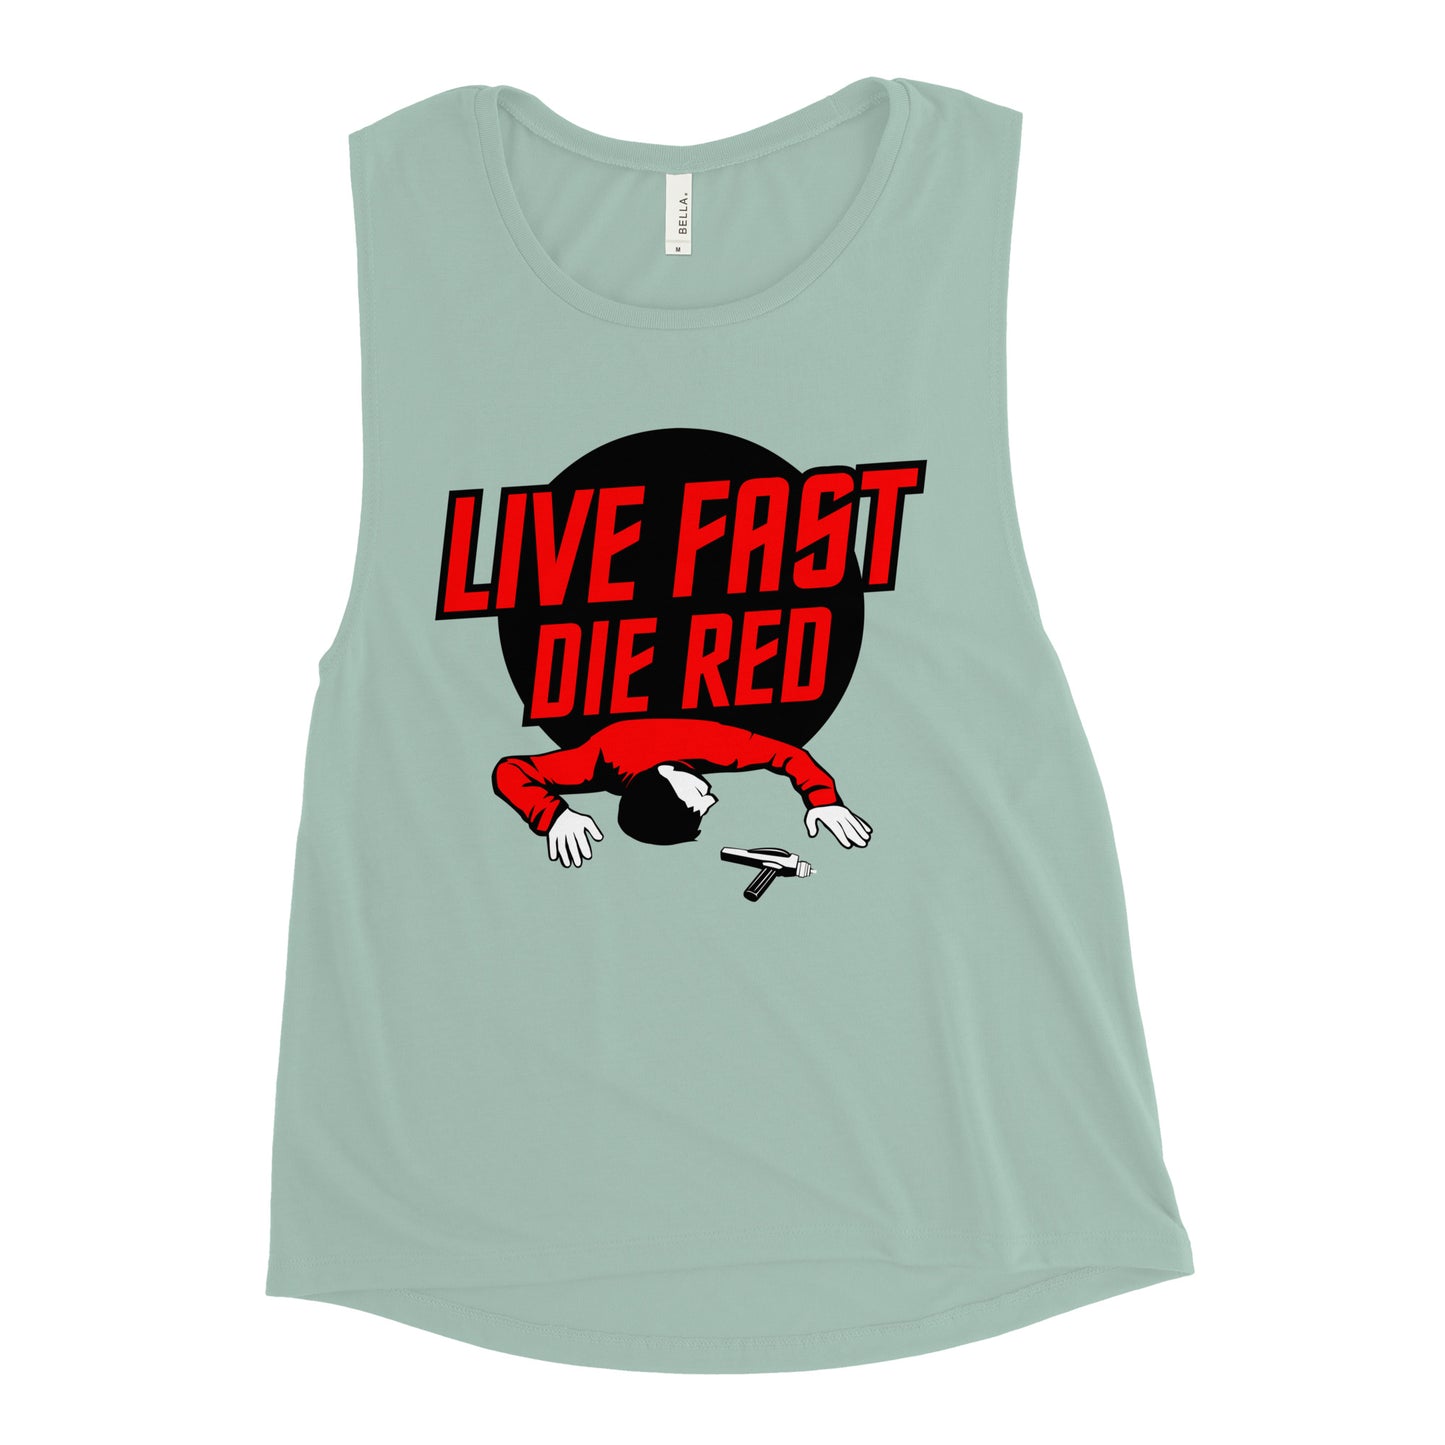 Live Fast Die Red Women's Muscle Tank